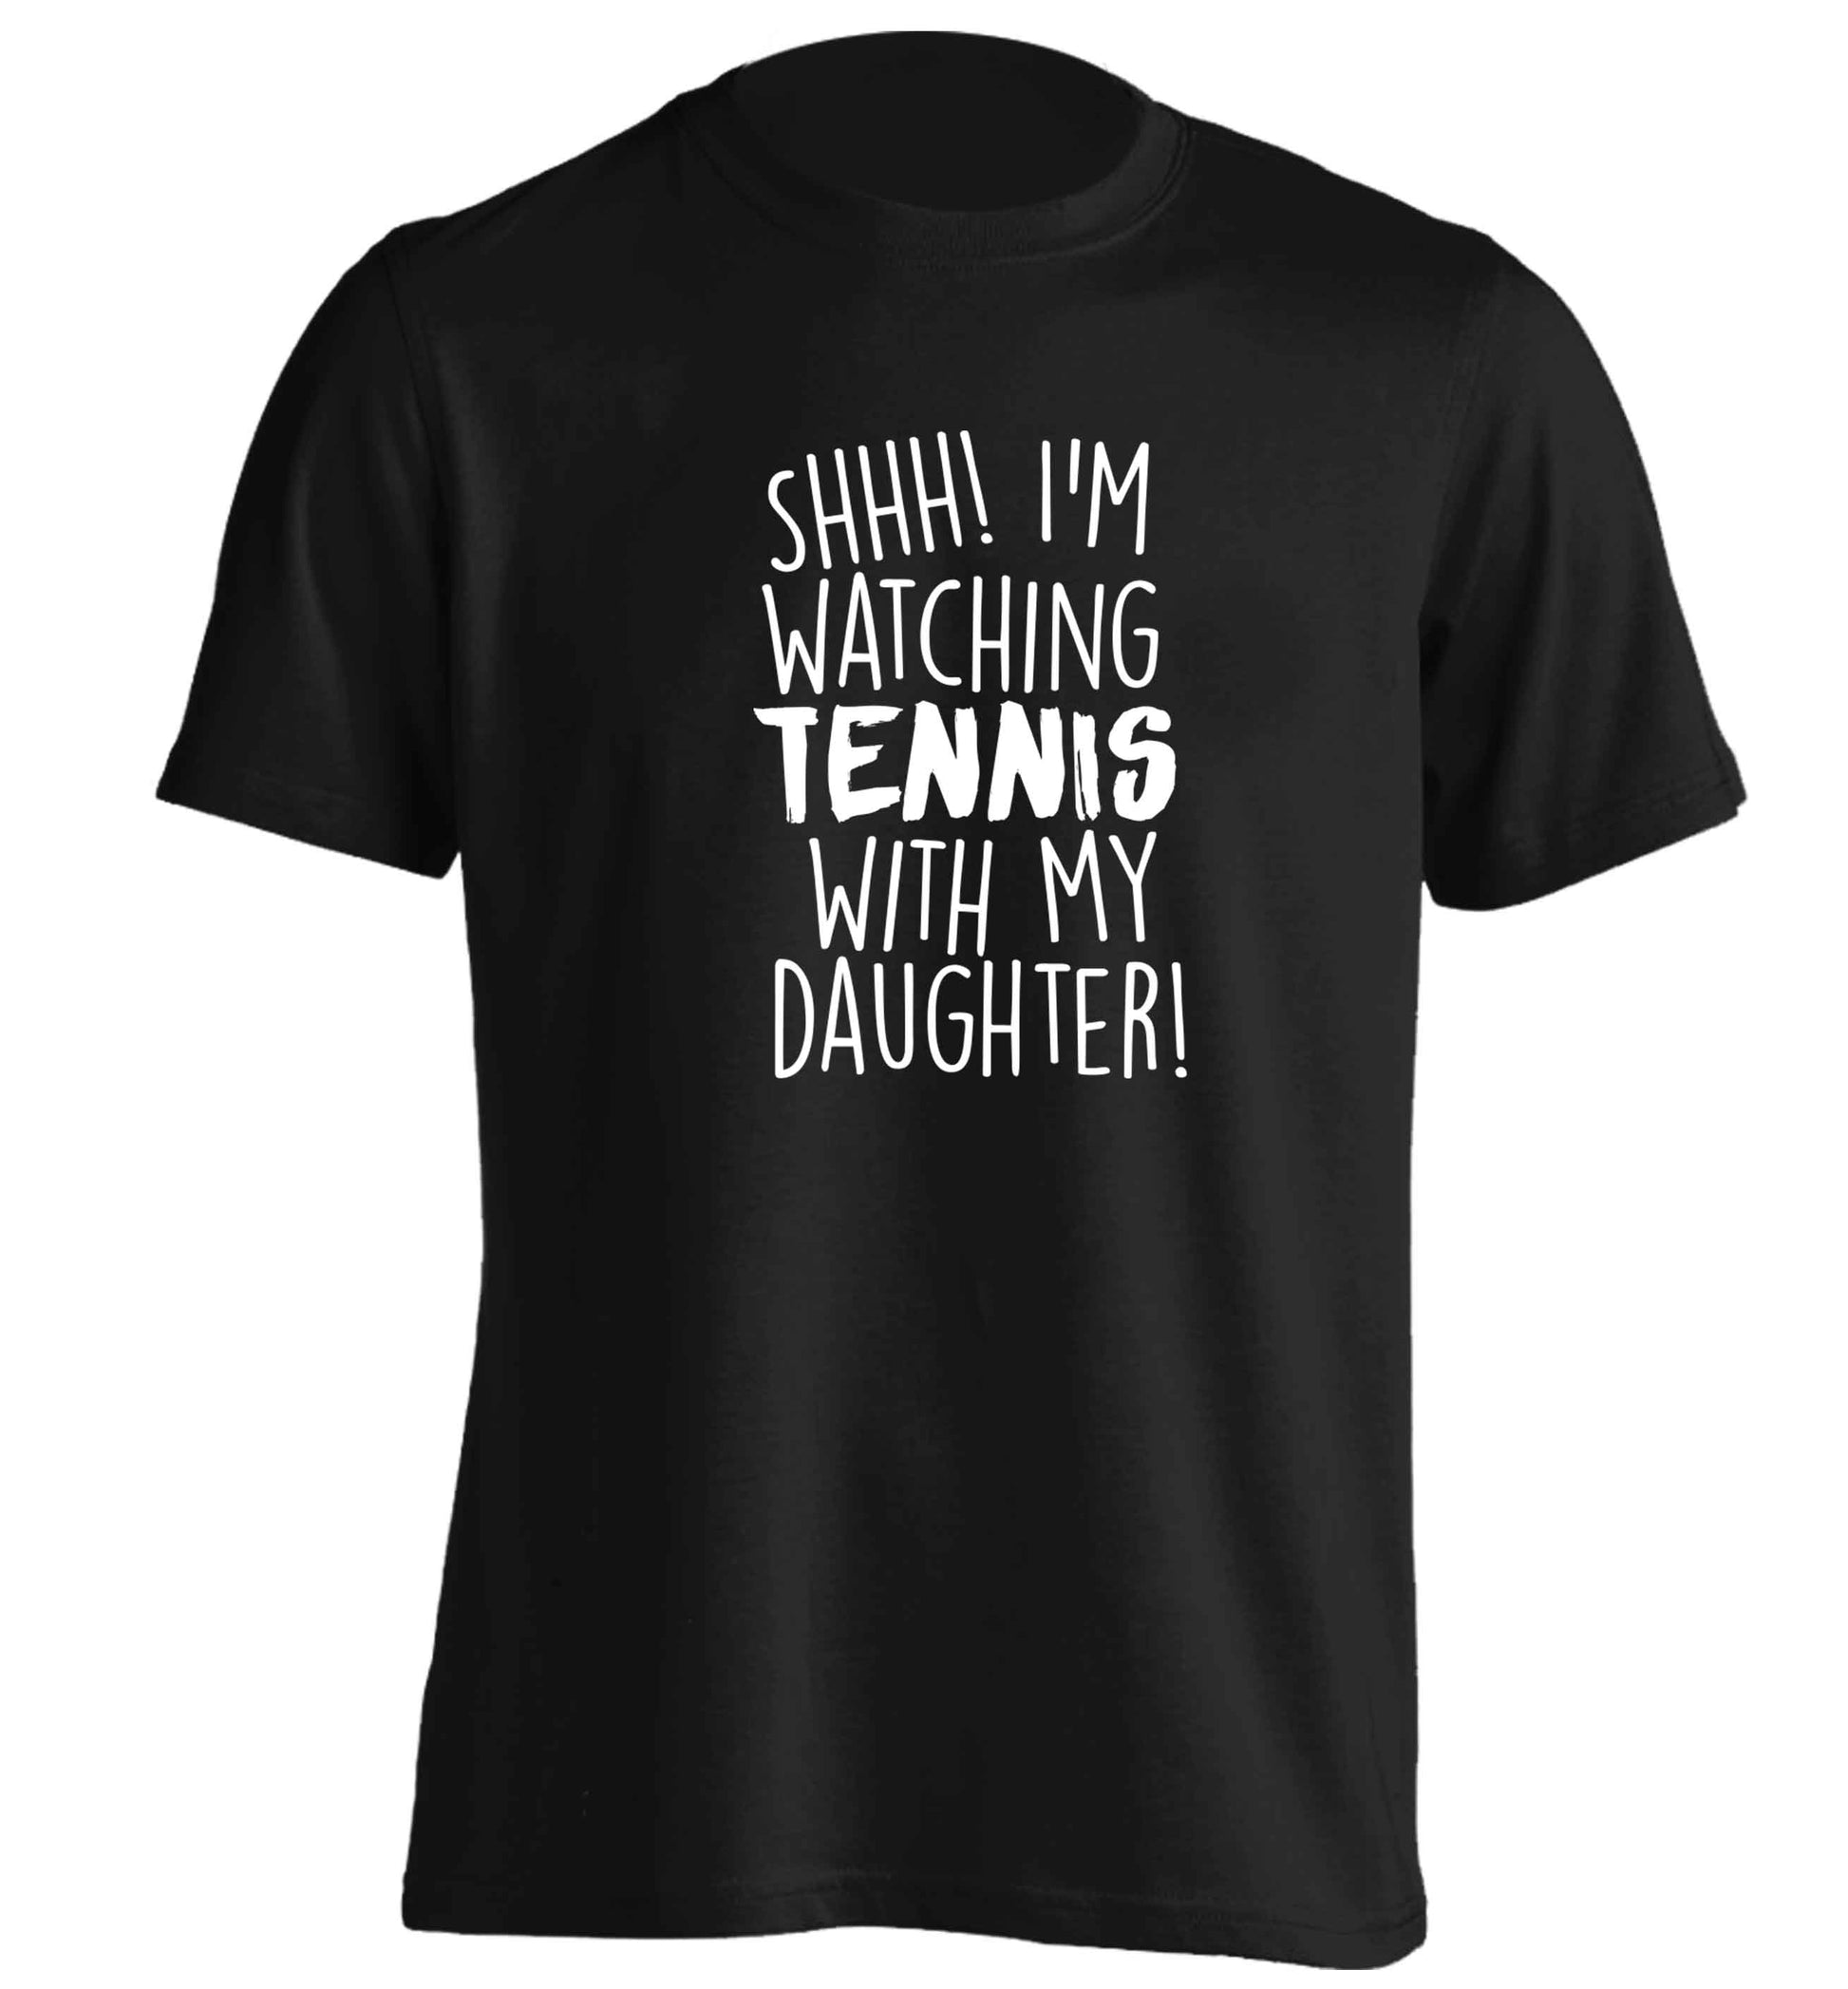 Shh! I'm watching tennis with my daughter! adults unisex black Tshirt 2XL